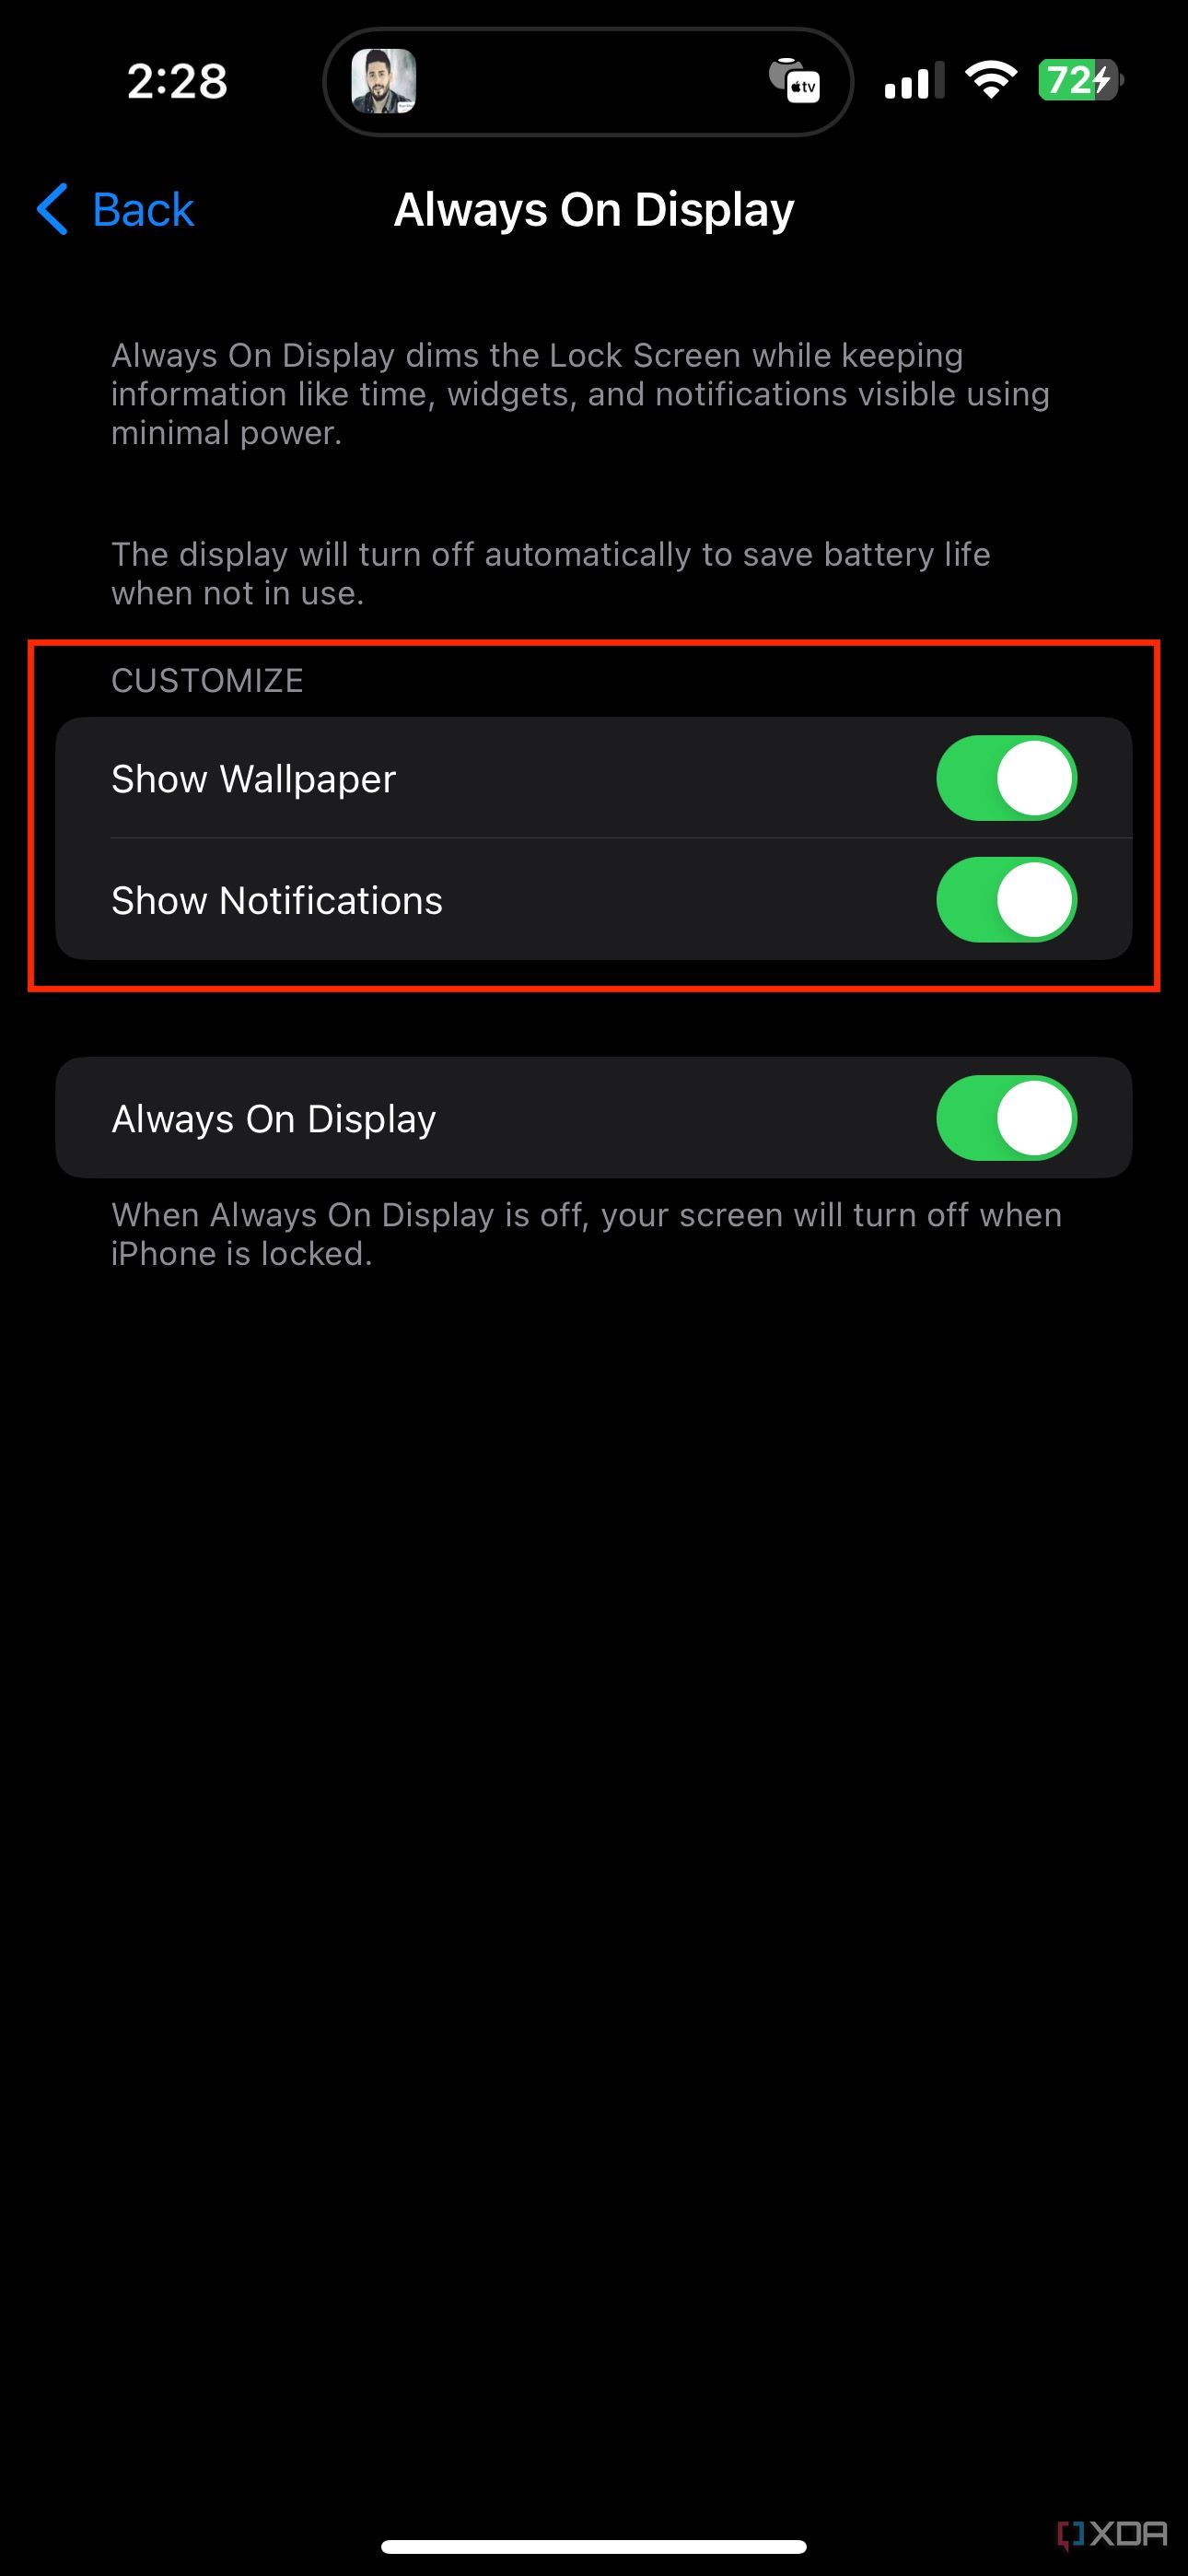 show wallpaper and show notifications toggles in iPhone settings